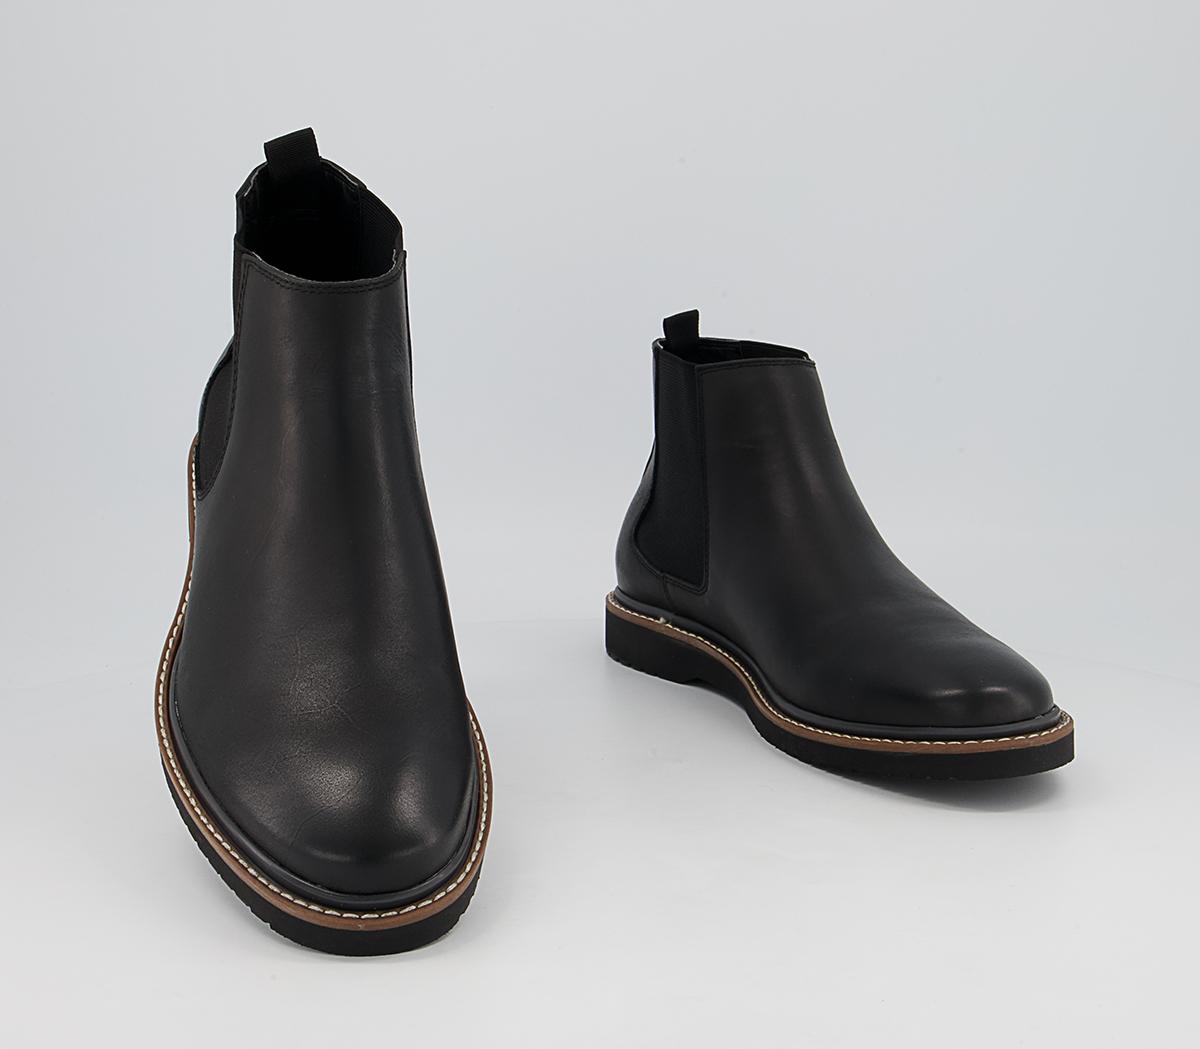 OFFICE Bolton Wedge Chelsea Boots Black Leather - Men’s Boots